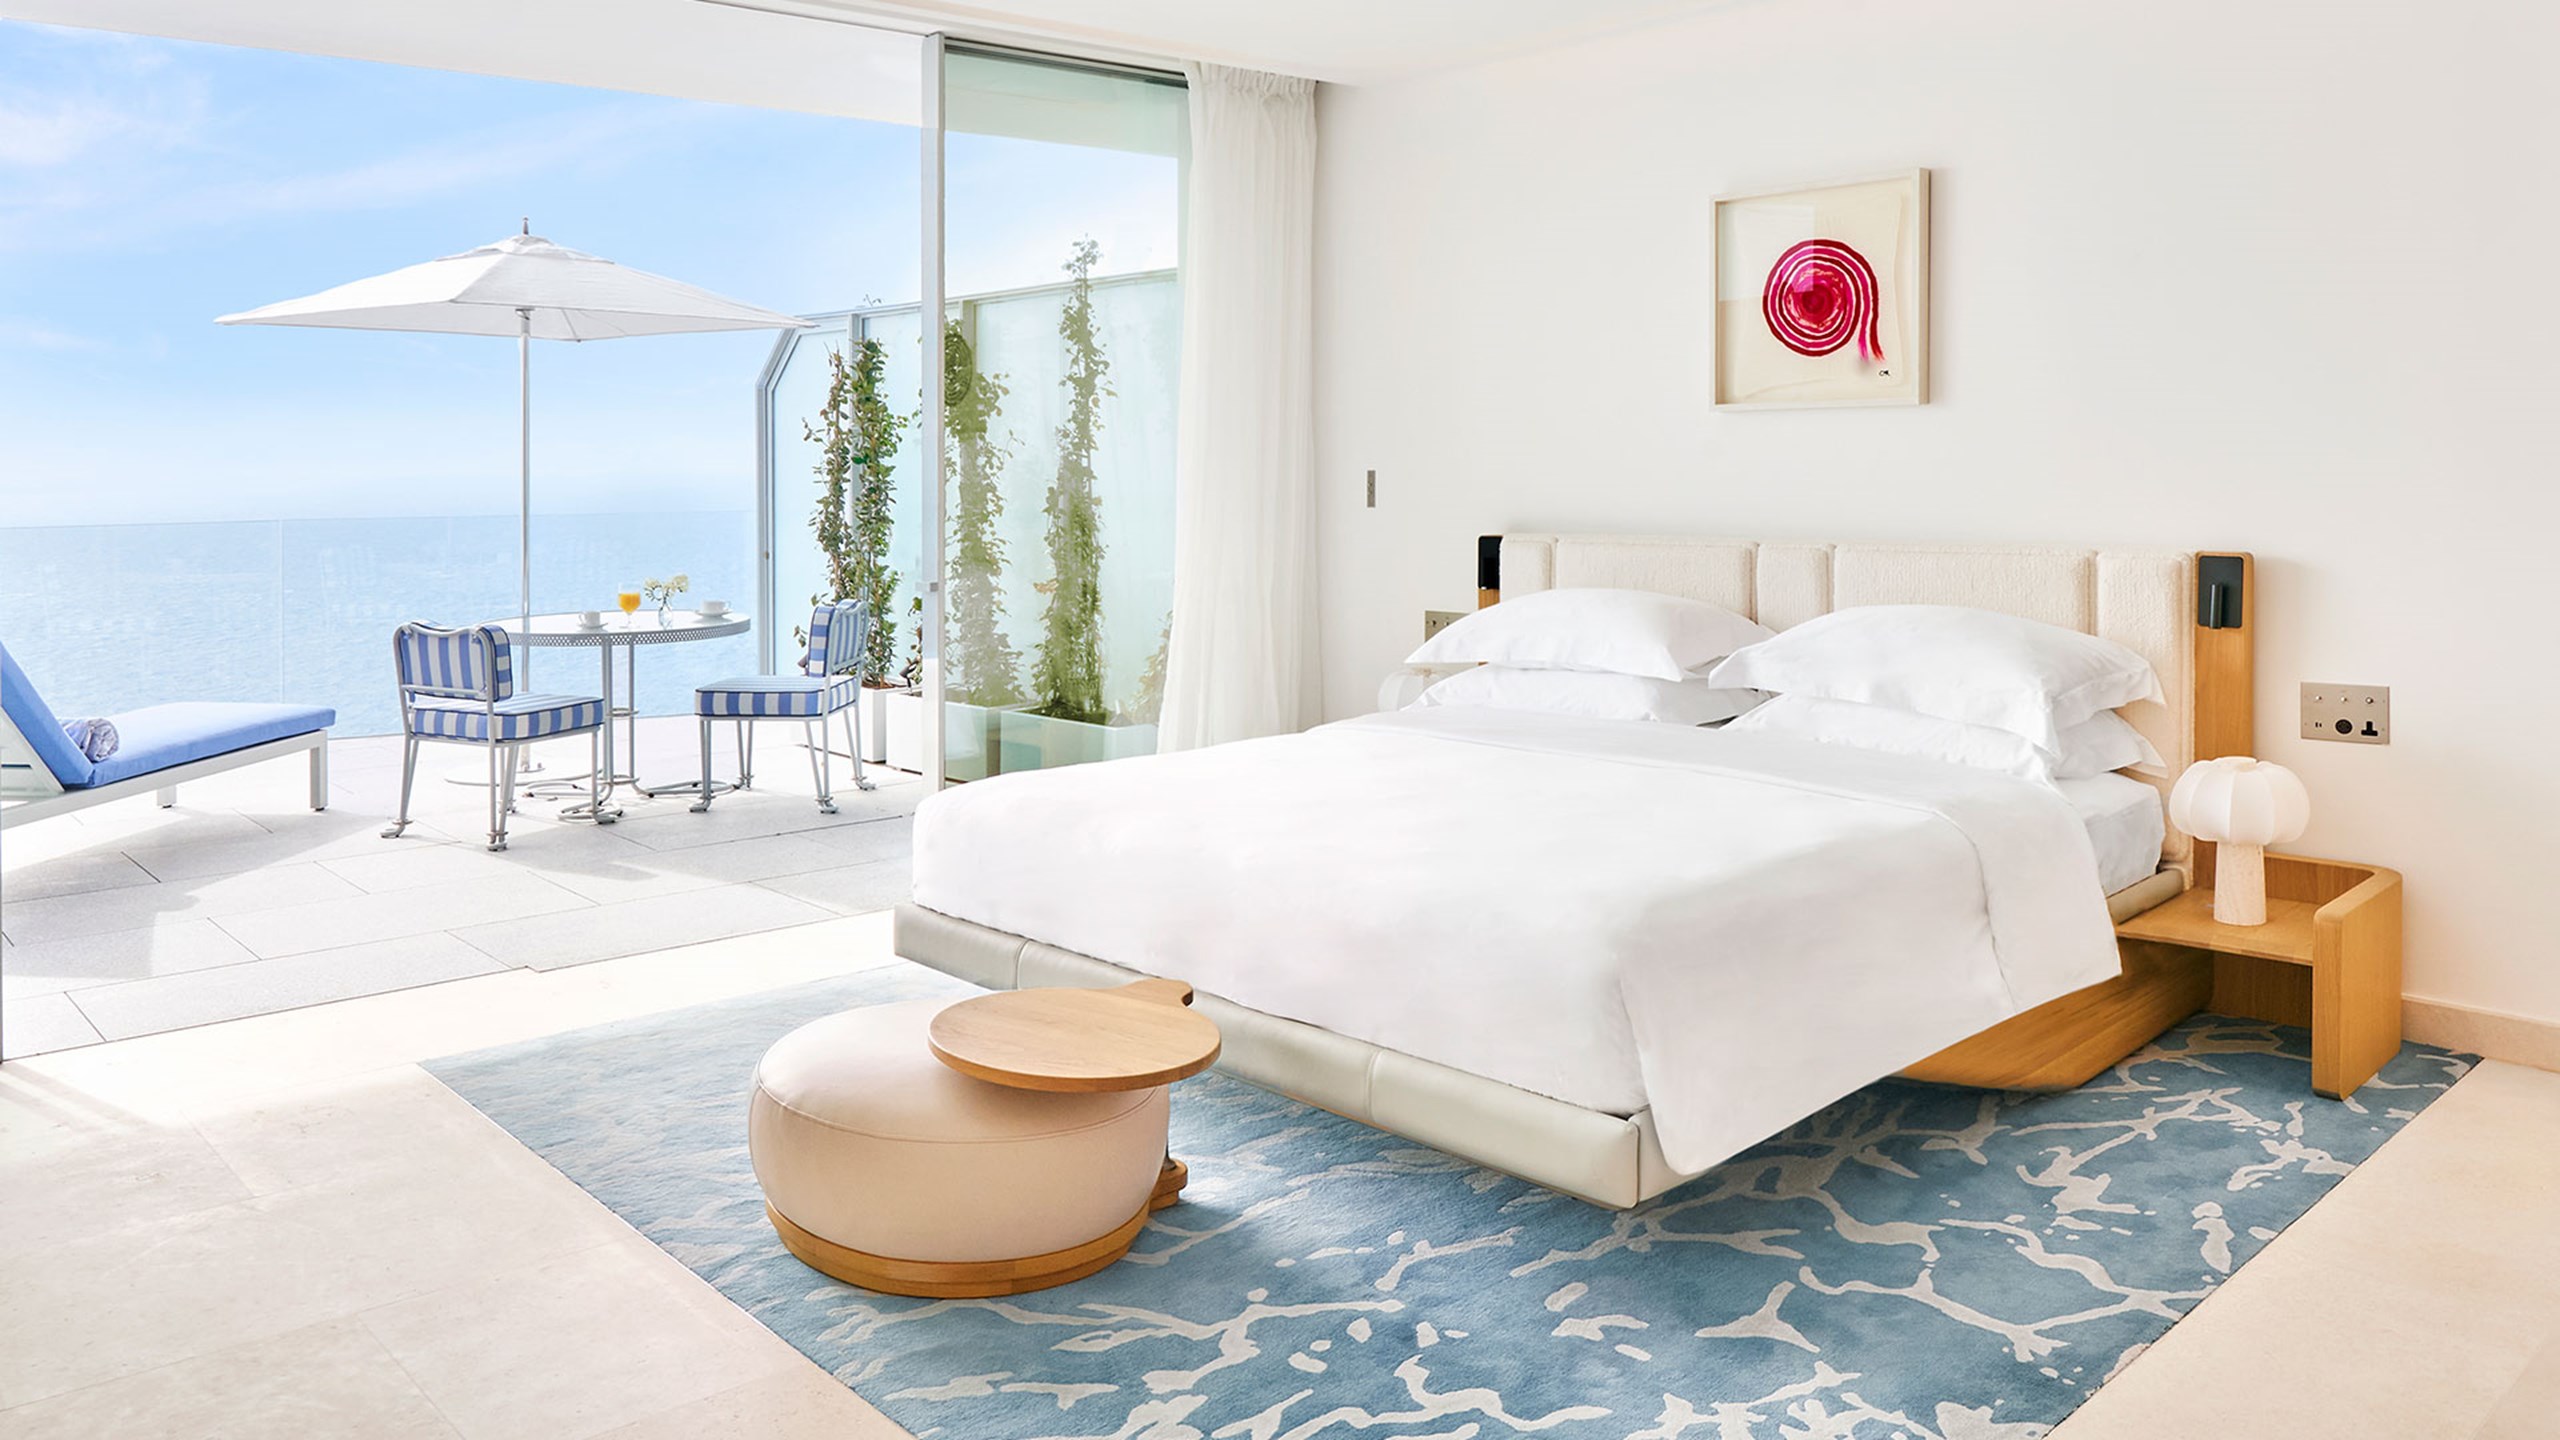 The Grand Sea View Studio is a modern white room featuring chic wooden themes and a uninterrupted view of the sea